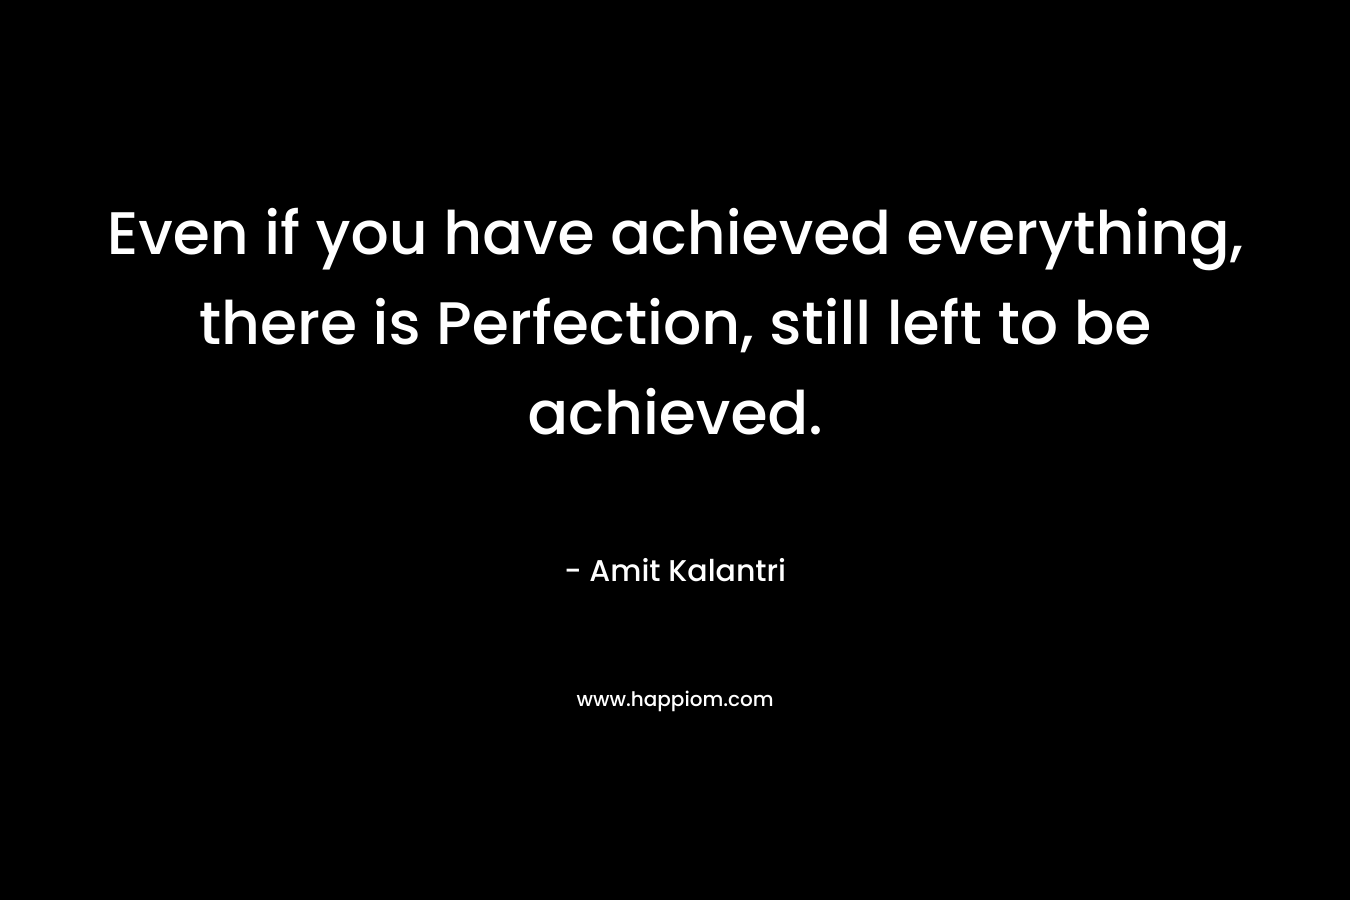 Even if you have achieved everything, there is Perfection, still left to be achieved.